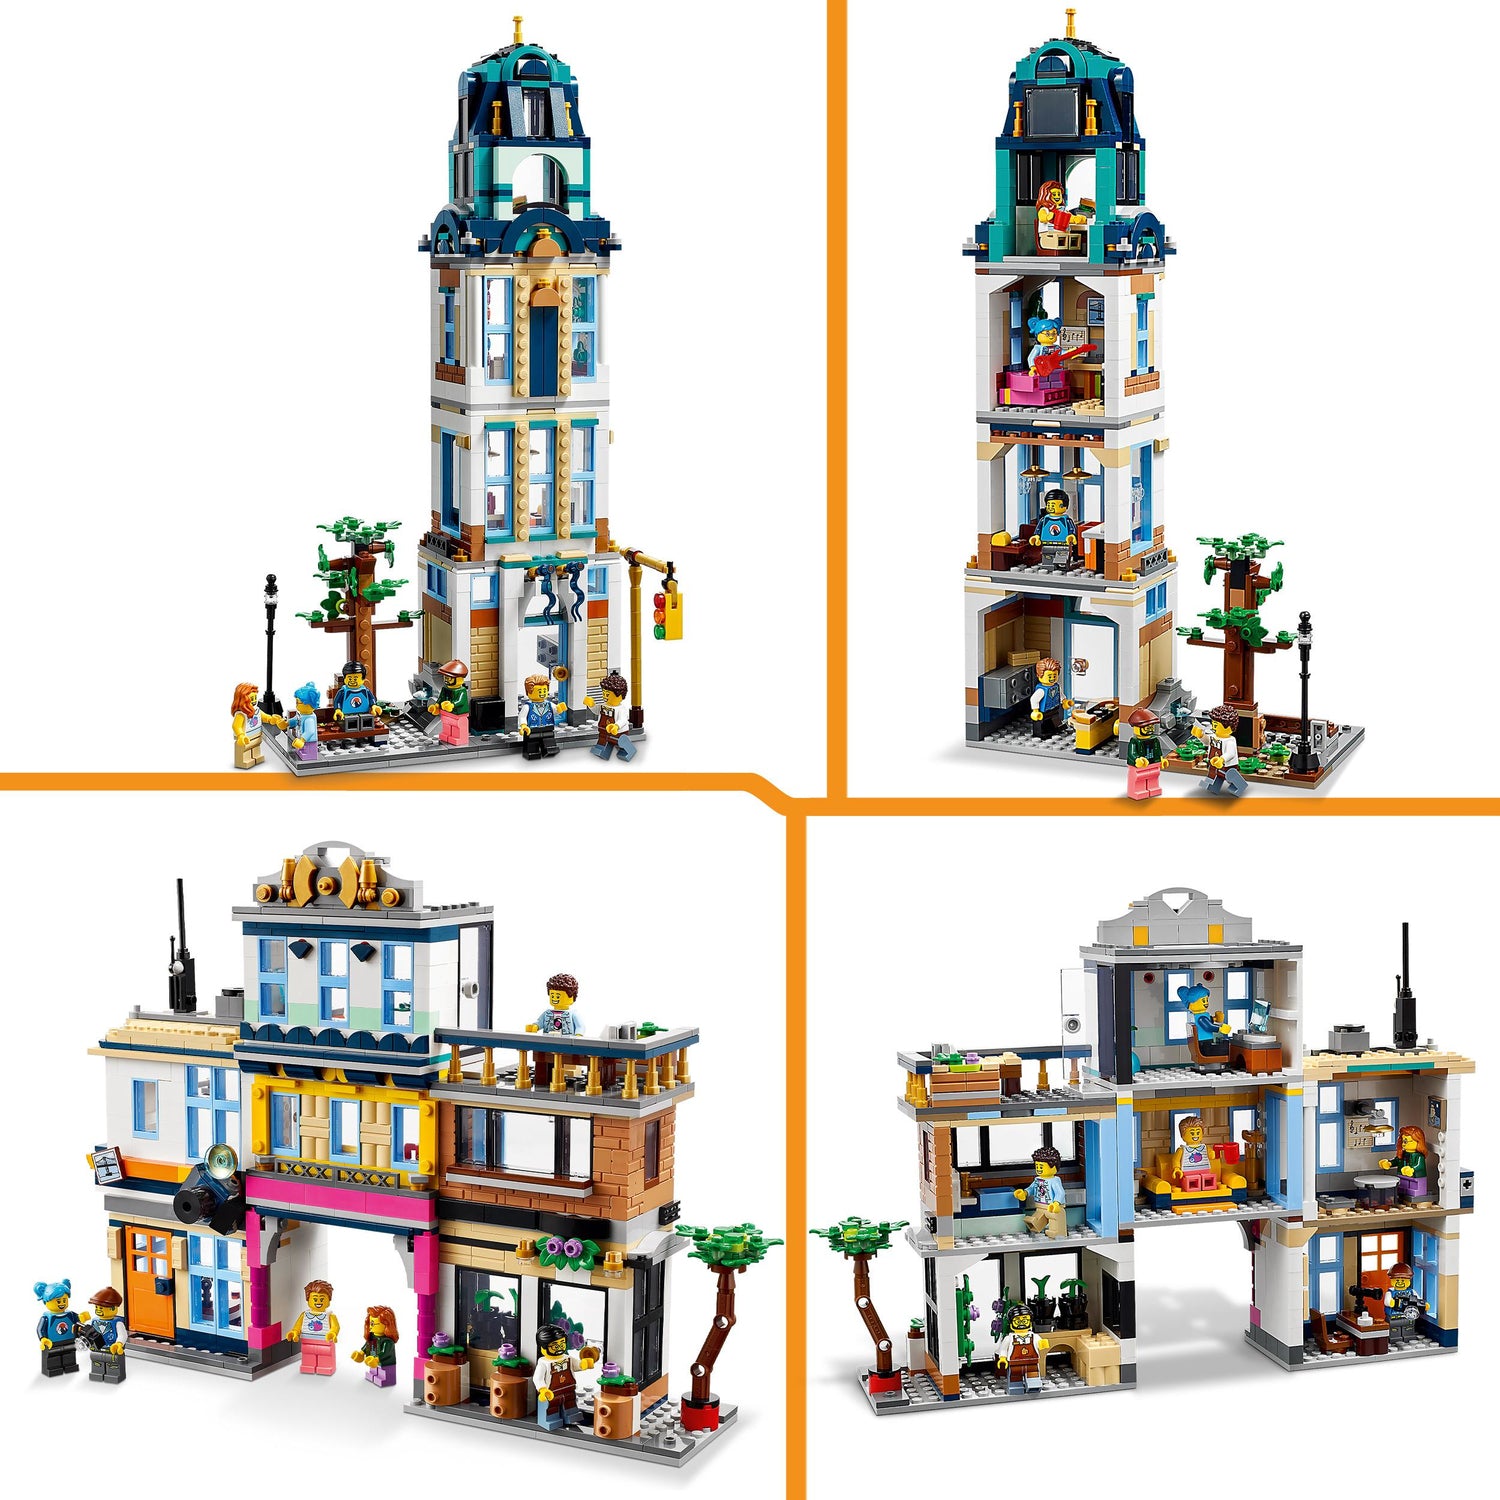 LEGO® Creator 3 in 1 Main Street Building Toy Set